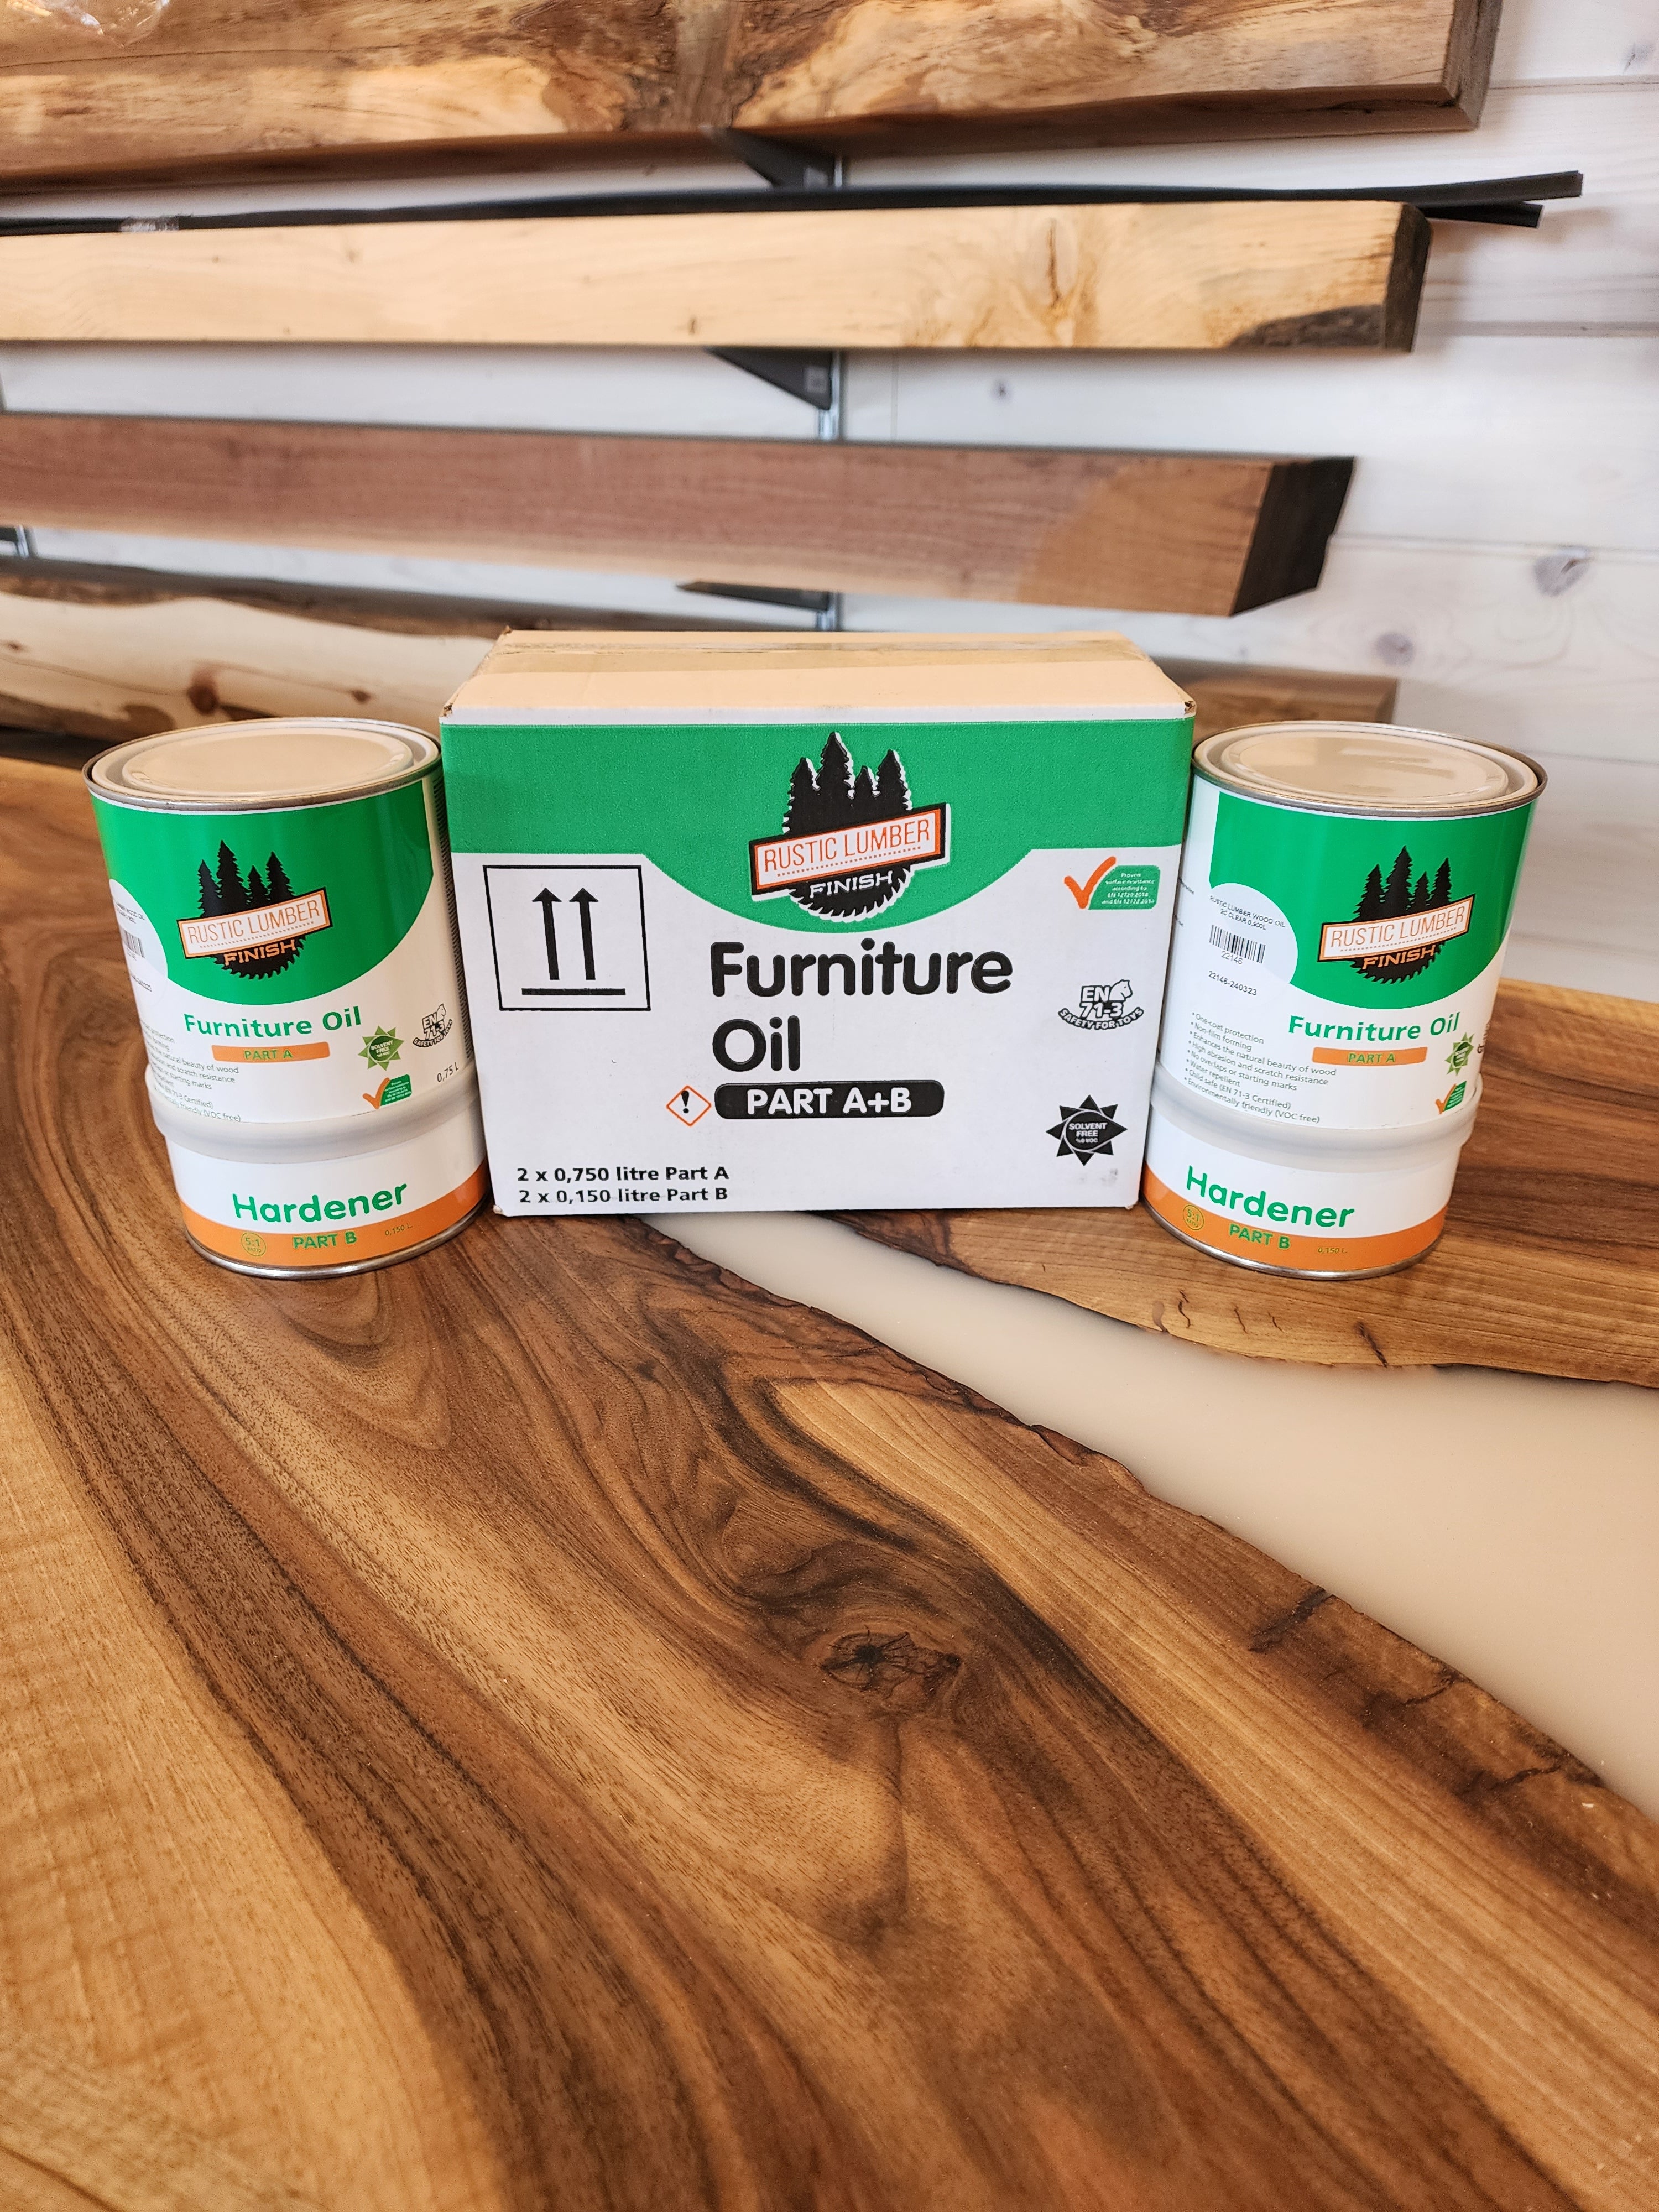 Why We've Used Linseed Oil on Our Furniture